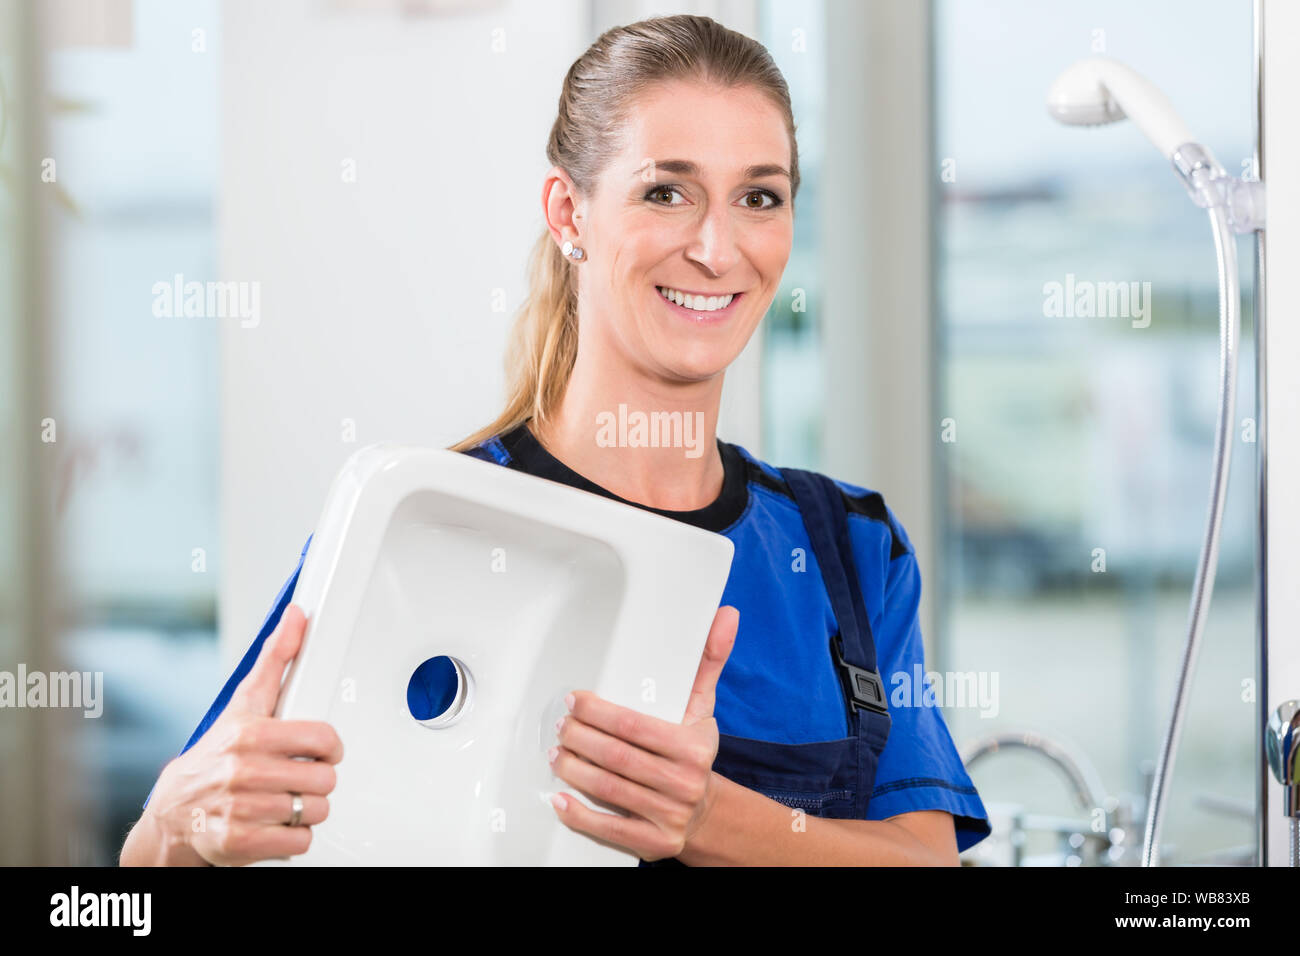 Female worker at work in a sanitary shop with high-quality ceramic fixtures Stock Photo